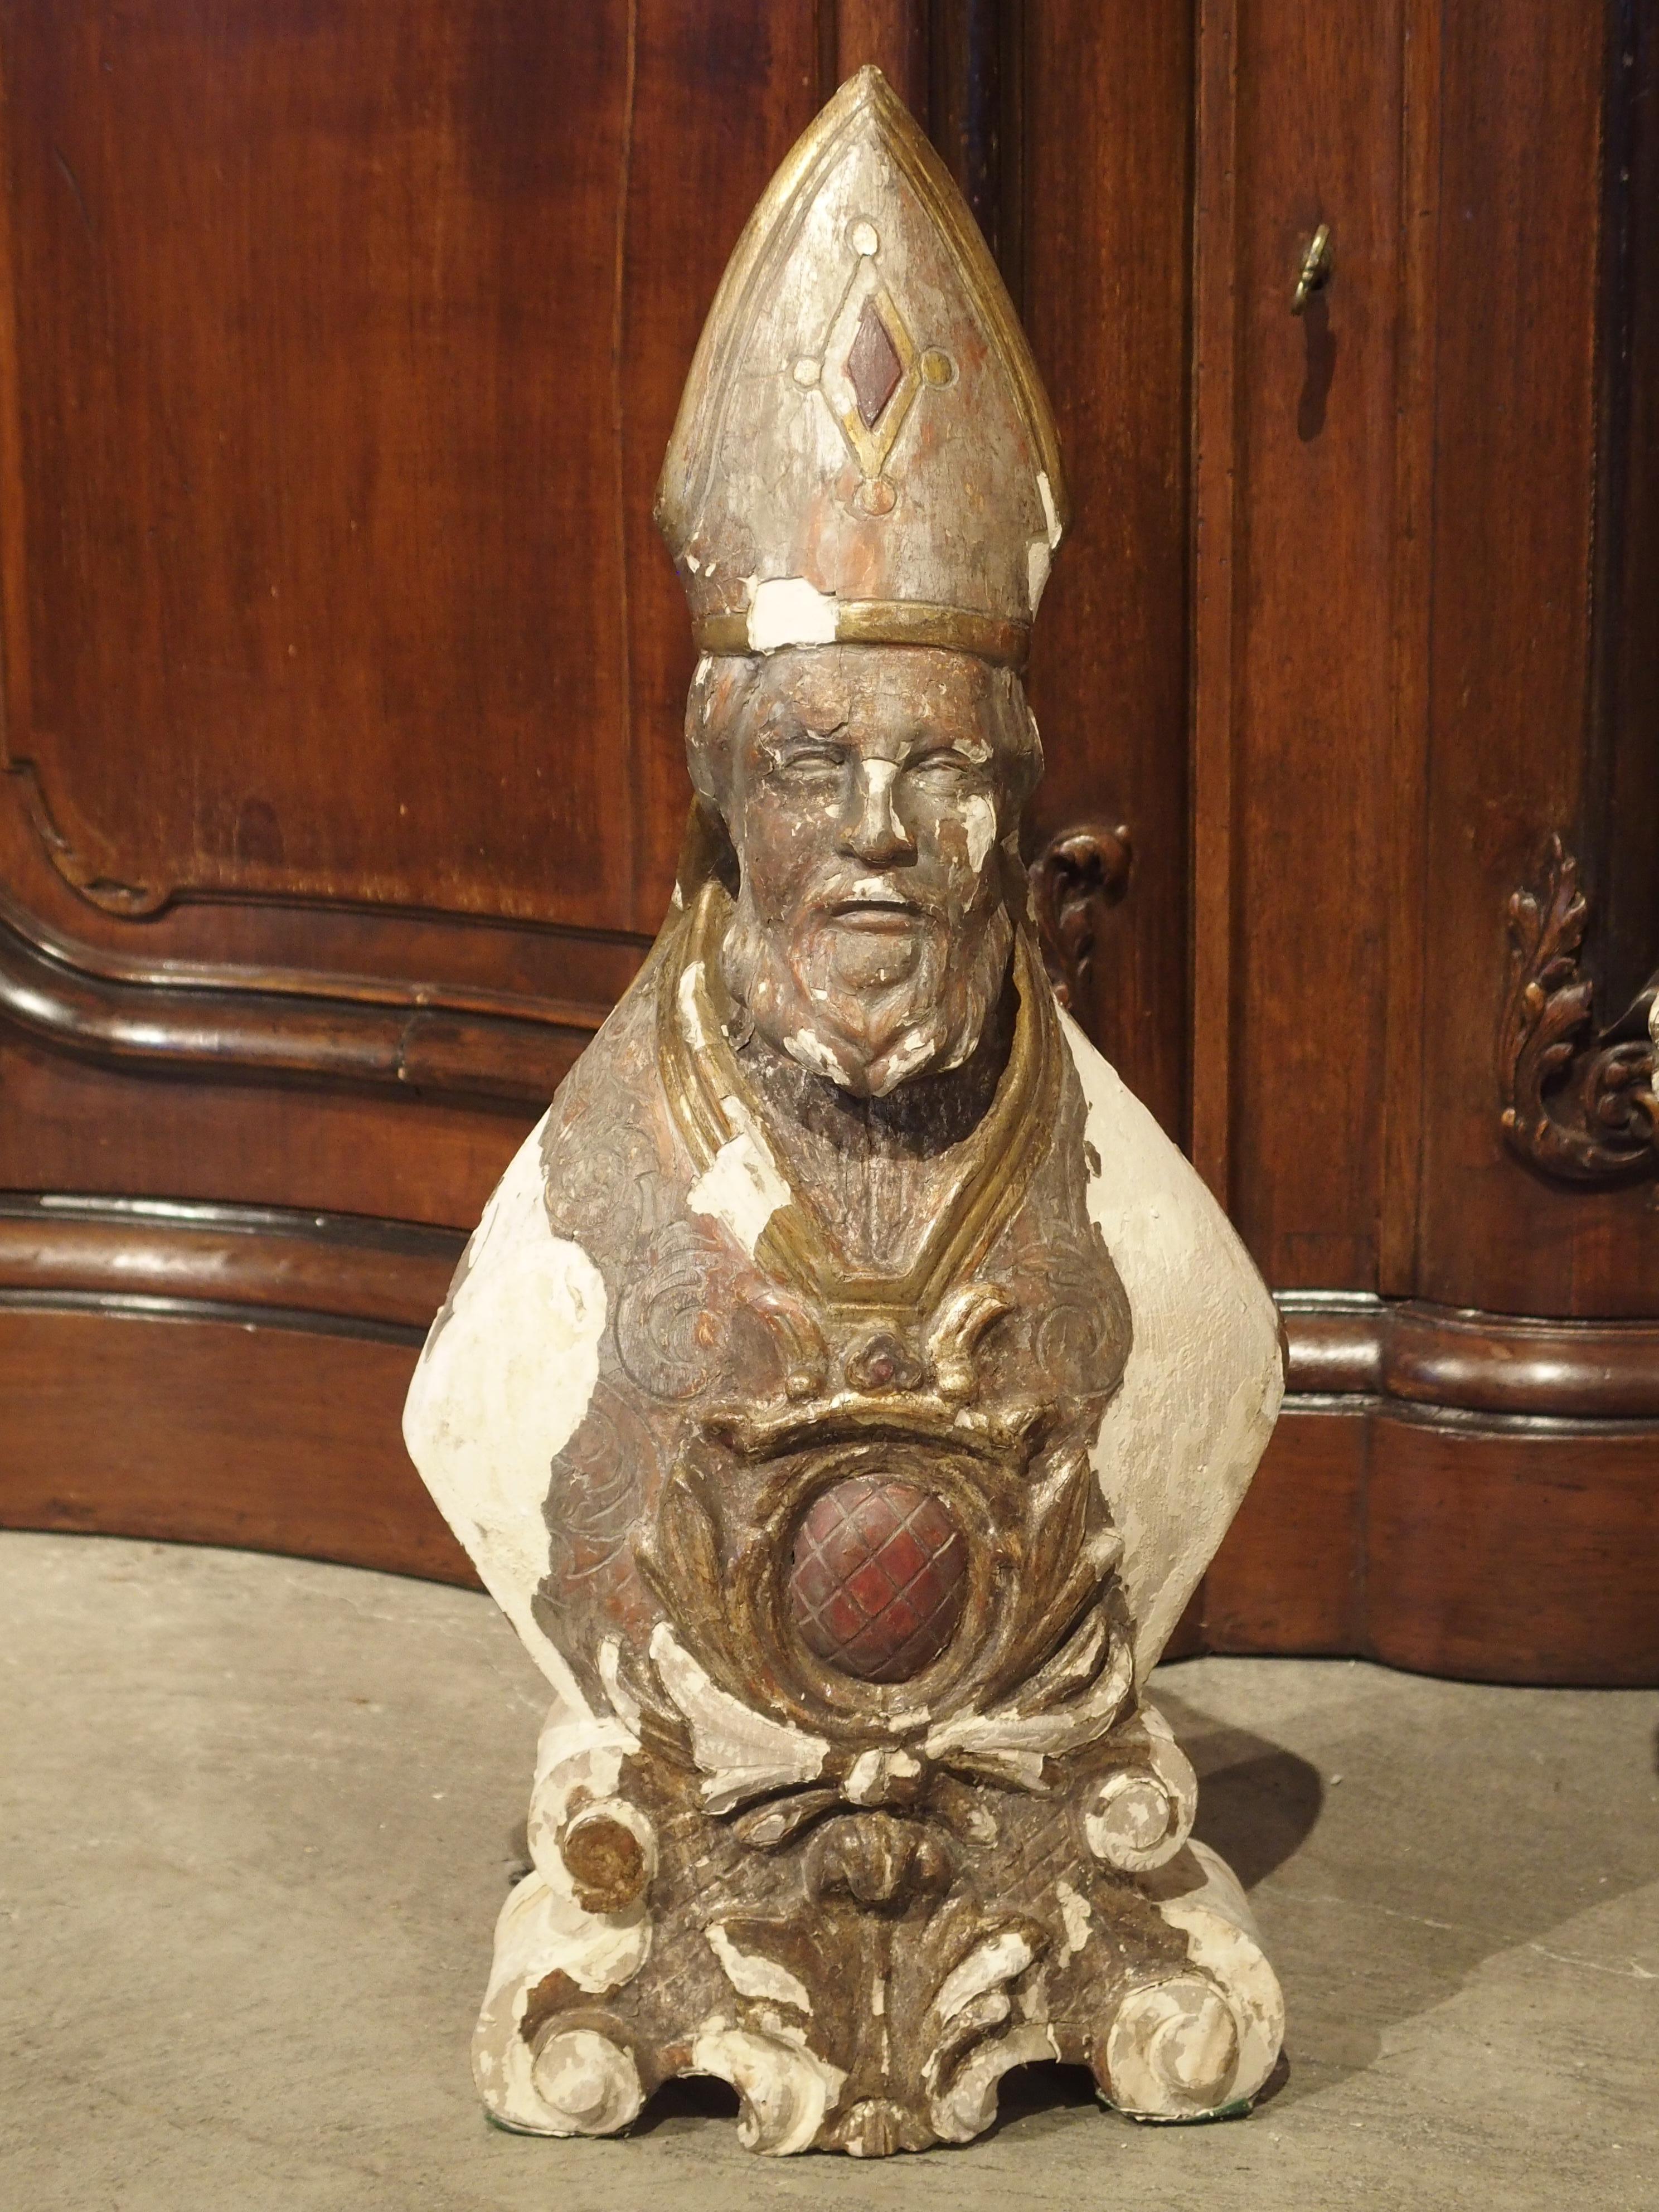 This rare pair of silvered bishop busts dates to the 1600s. They are from a church in Lazio, Italy, and based on their size, they were likely from a side altar. They are carved from wood, with a layer of gesso to bind the original silvering and